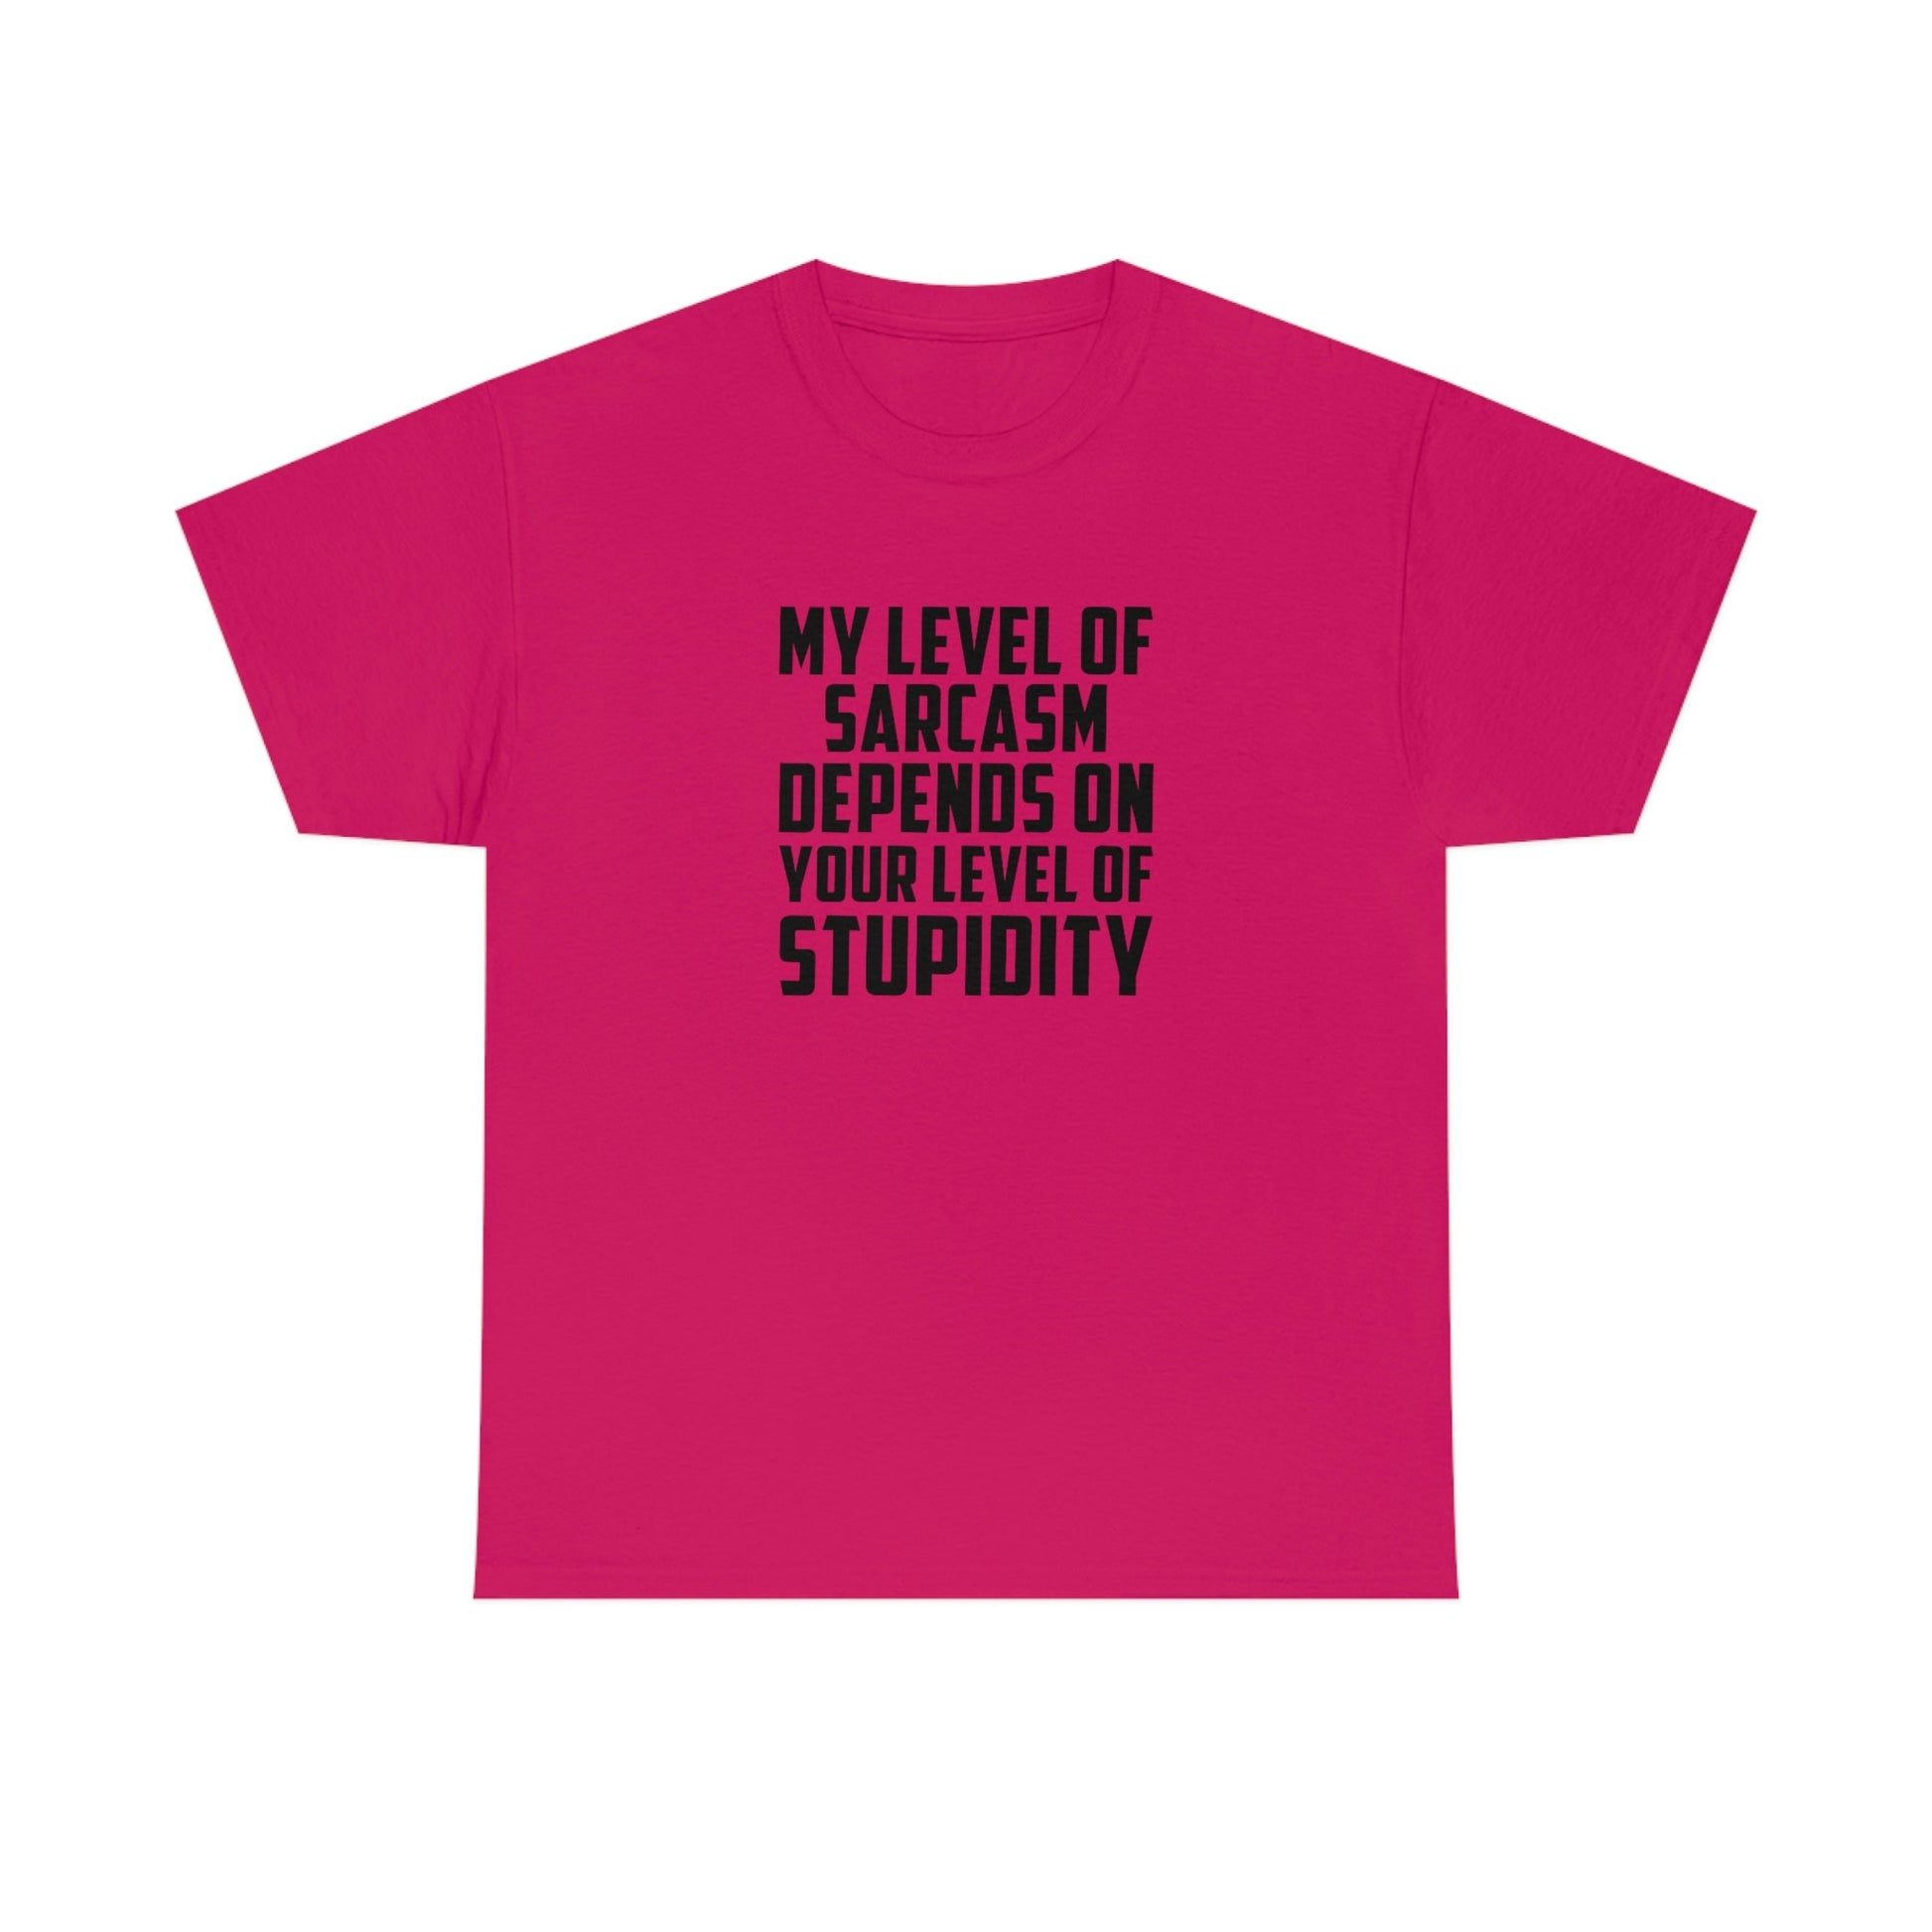 My Sarcasm Depends on Your Stupidity Cotton Tee T-Shirt Pink Sweetheart